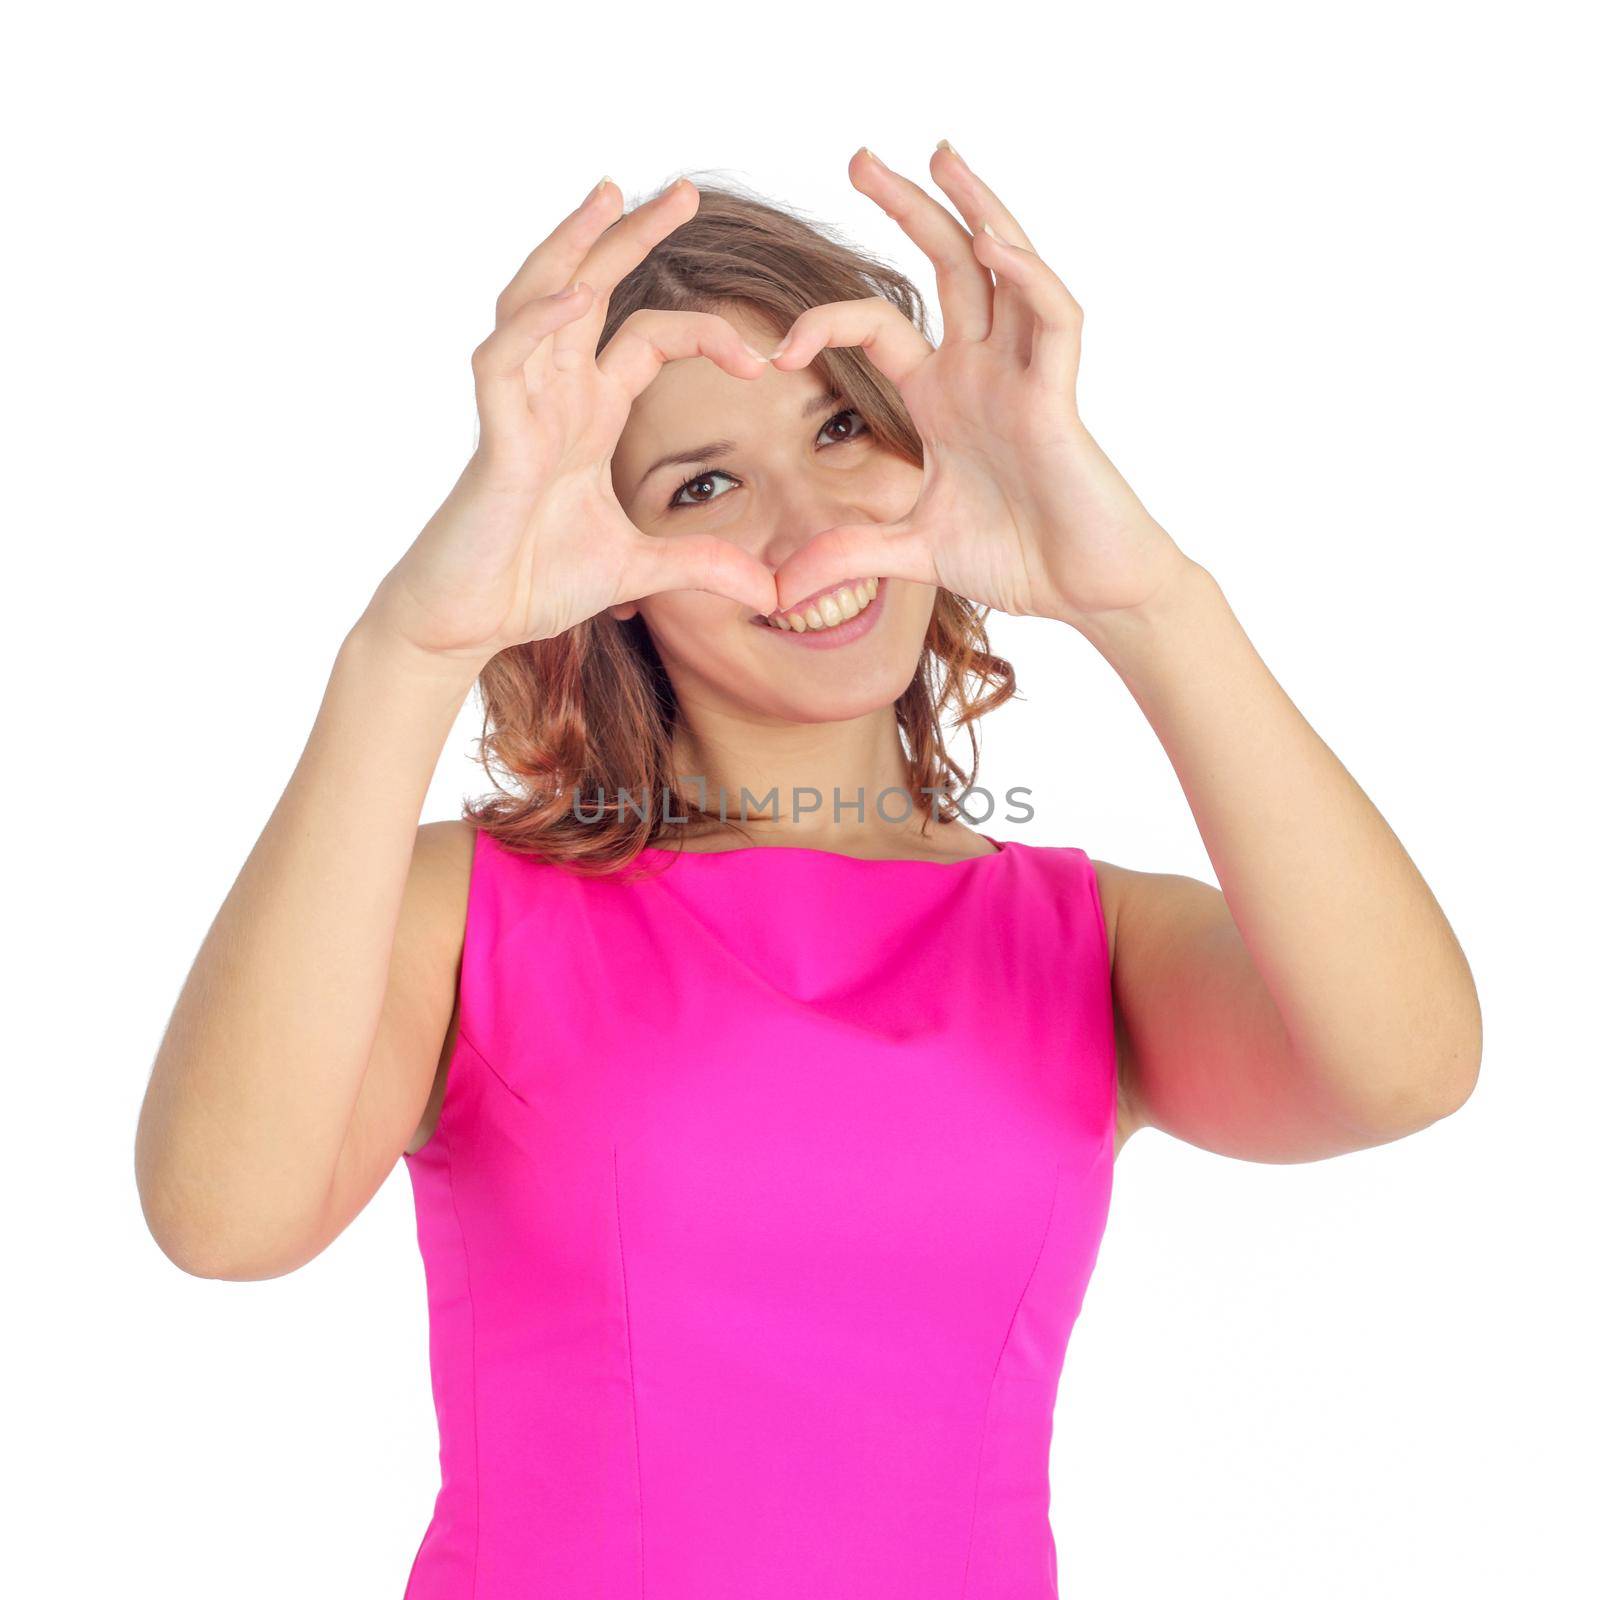 Young woman making a heart symbol with her hands by lanych